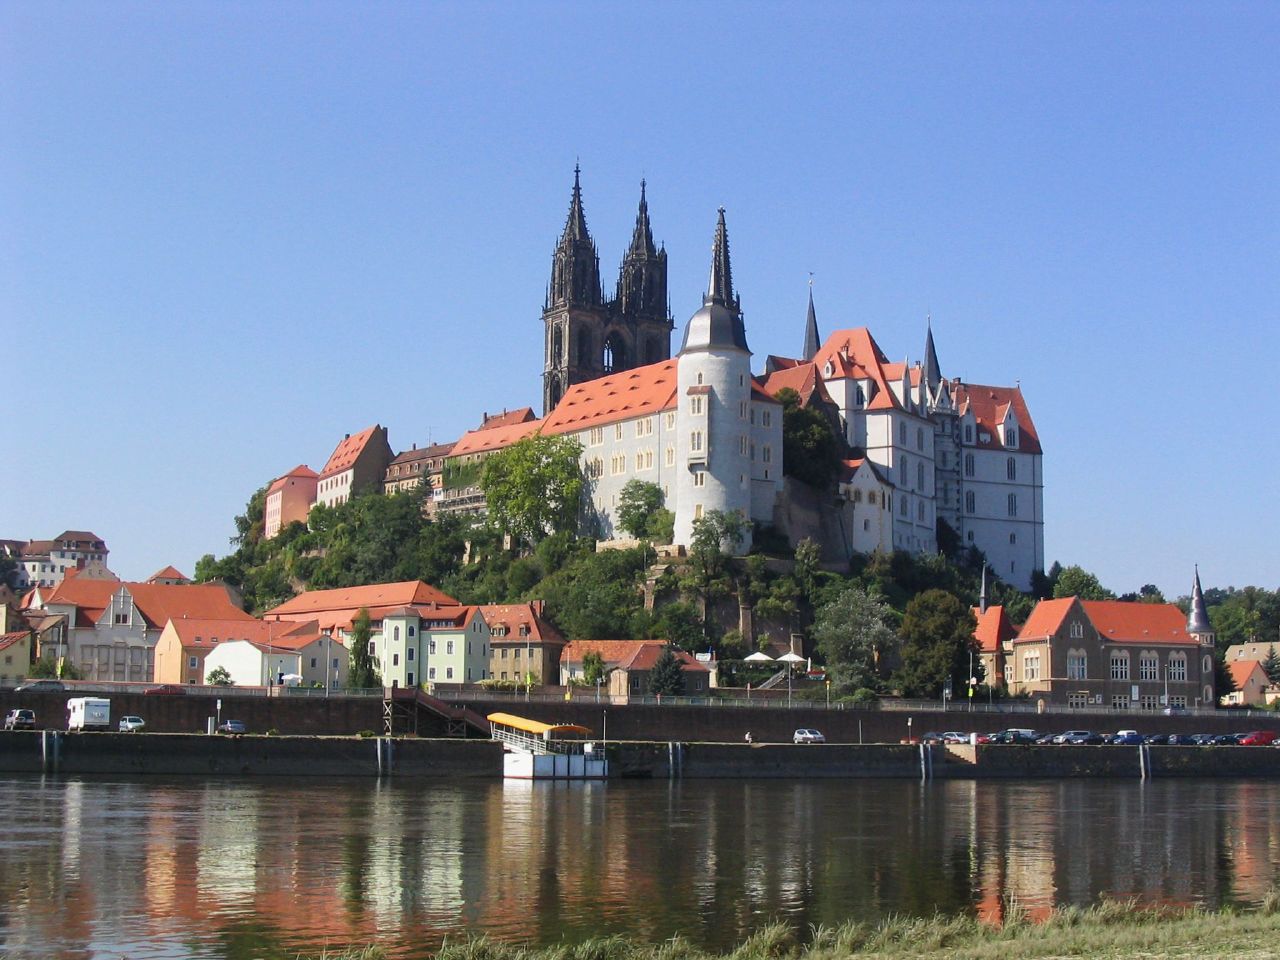 View of Meissen on the Elbe